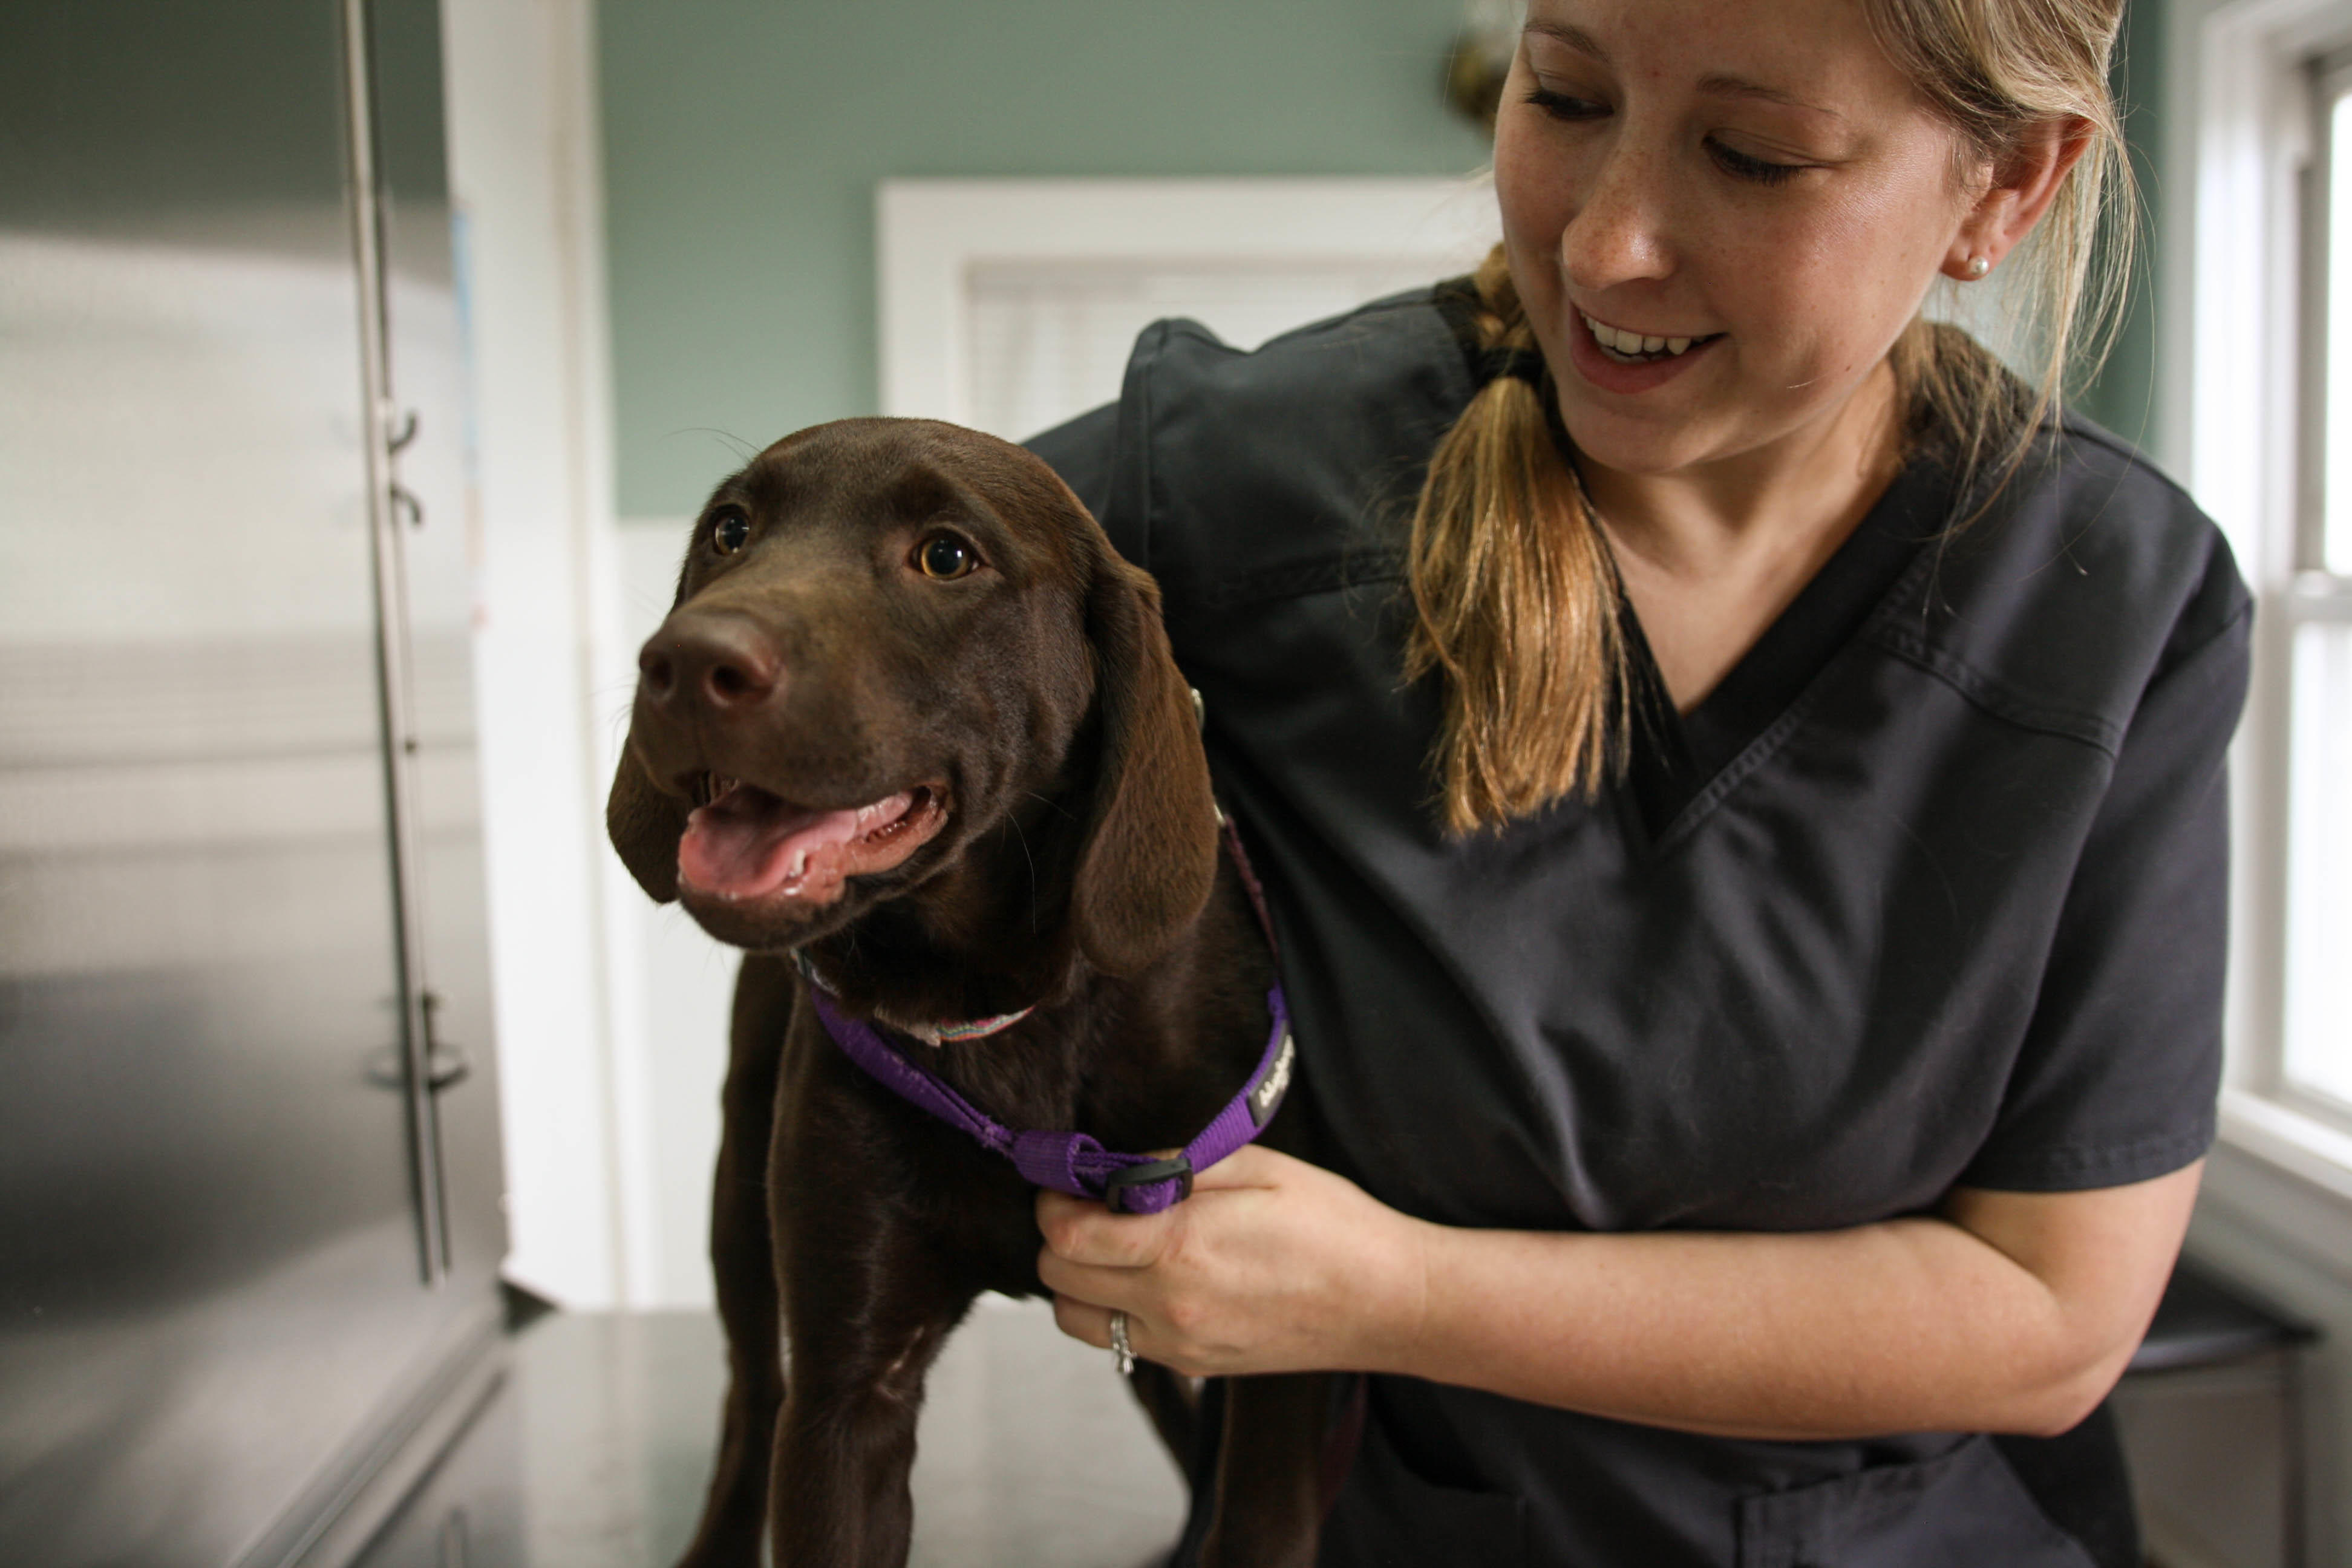 Our vet techs are not only very well trained, they’re also doing what they love. That is why we trust them completely to provide the best, most compassionate care possible every single time.